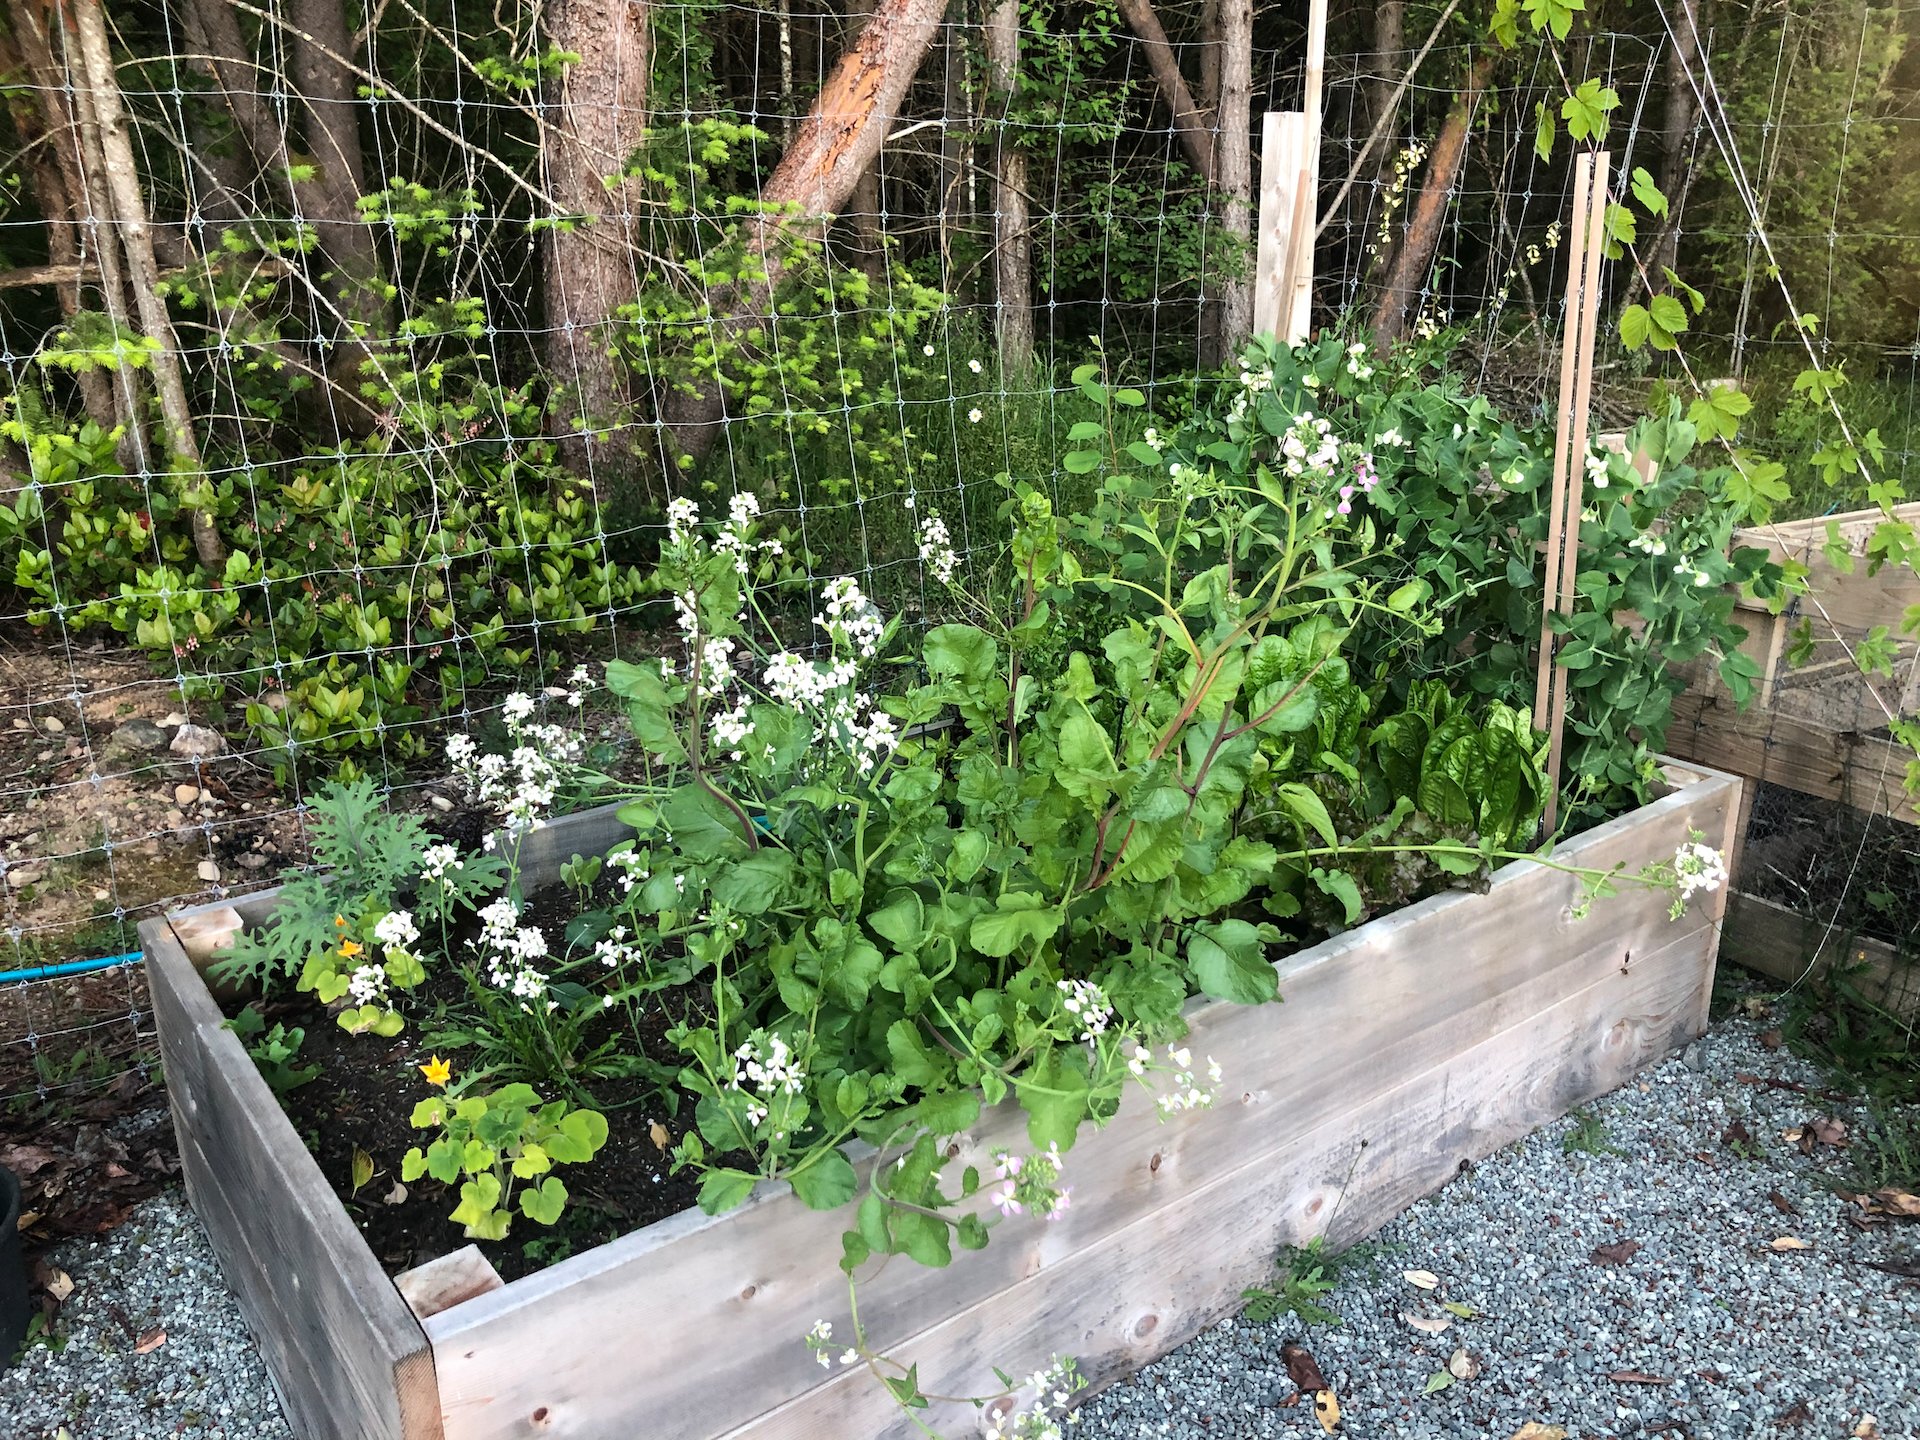  Sadly, the remaining radishes bolted on me and got a little out of control. The peas are all in flower - surprisingly late. 